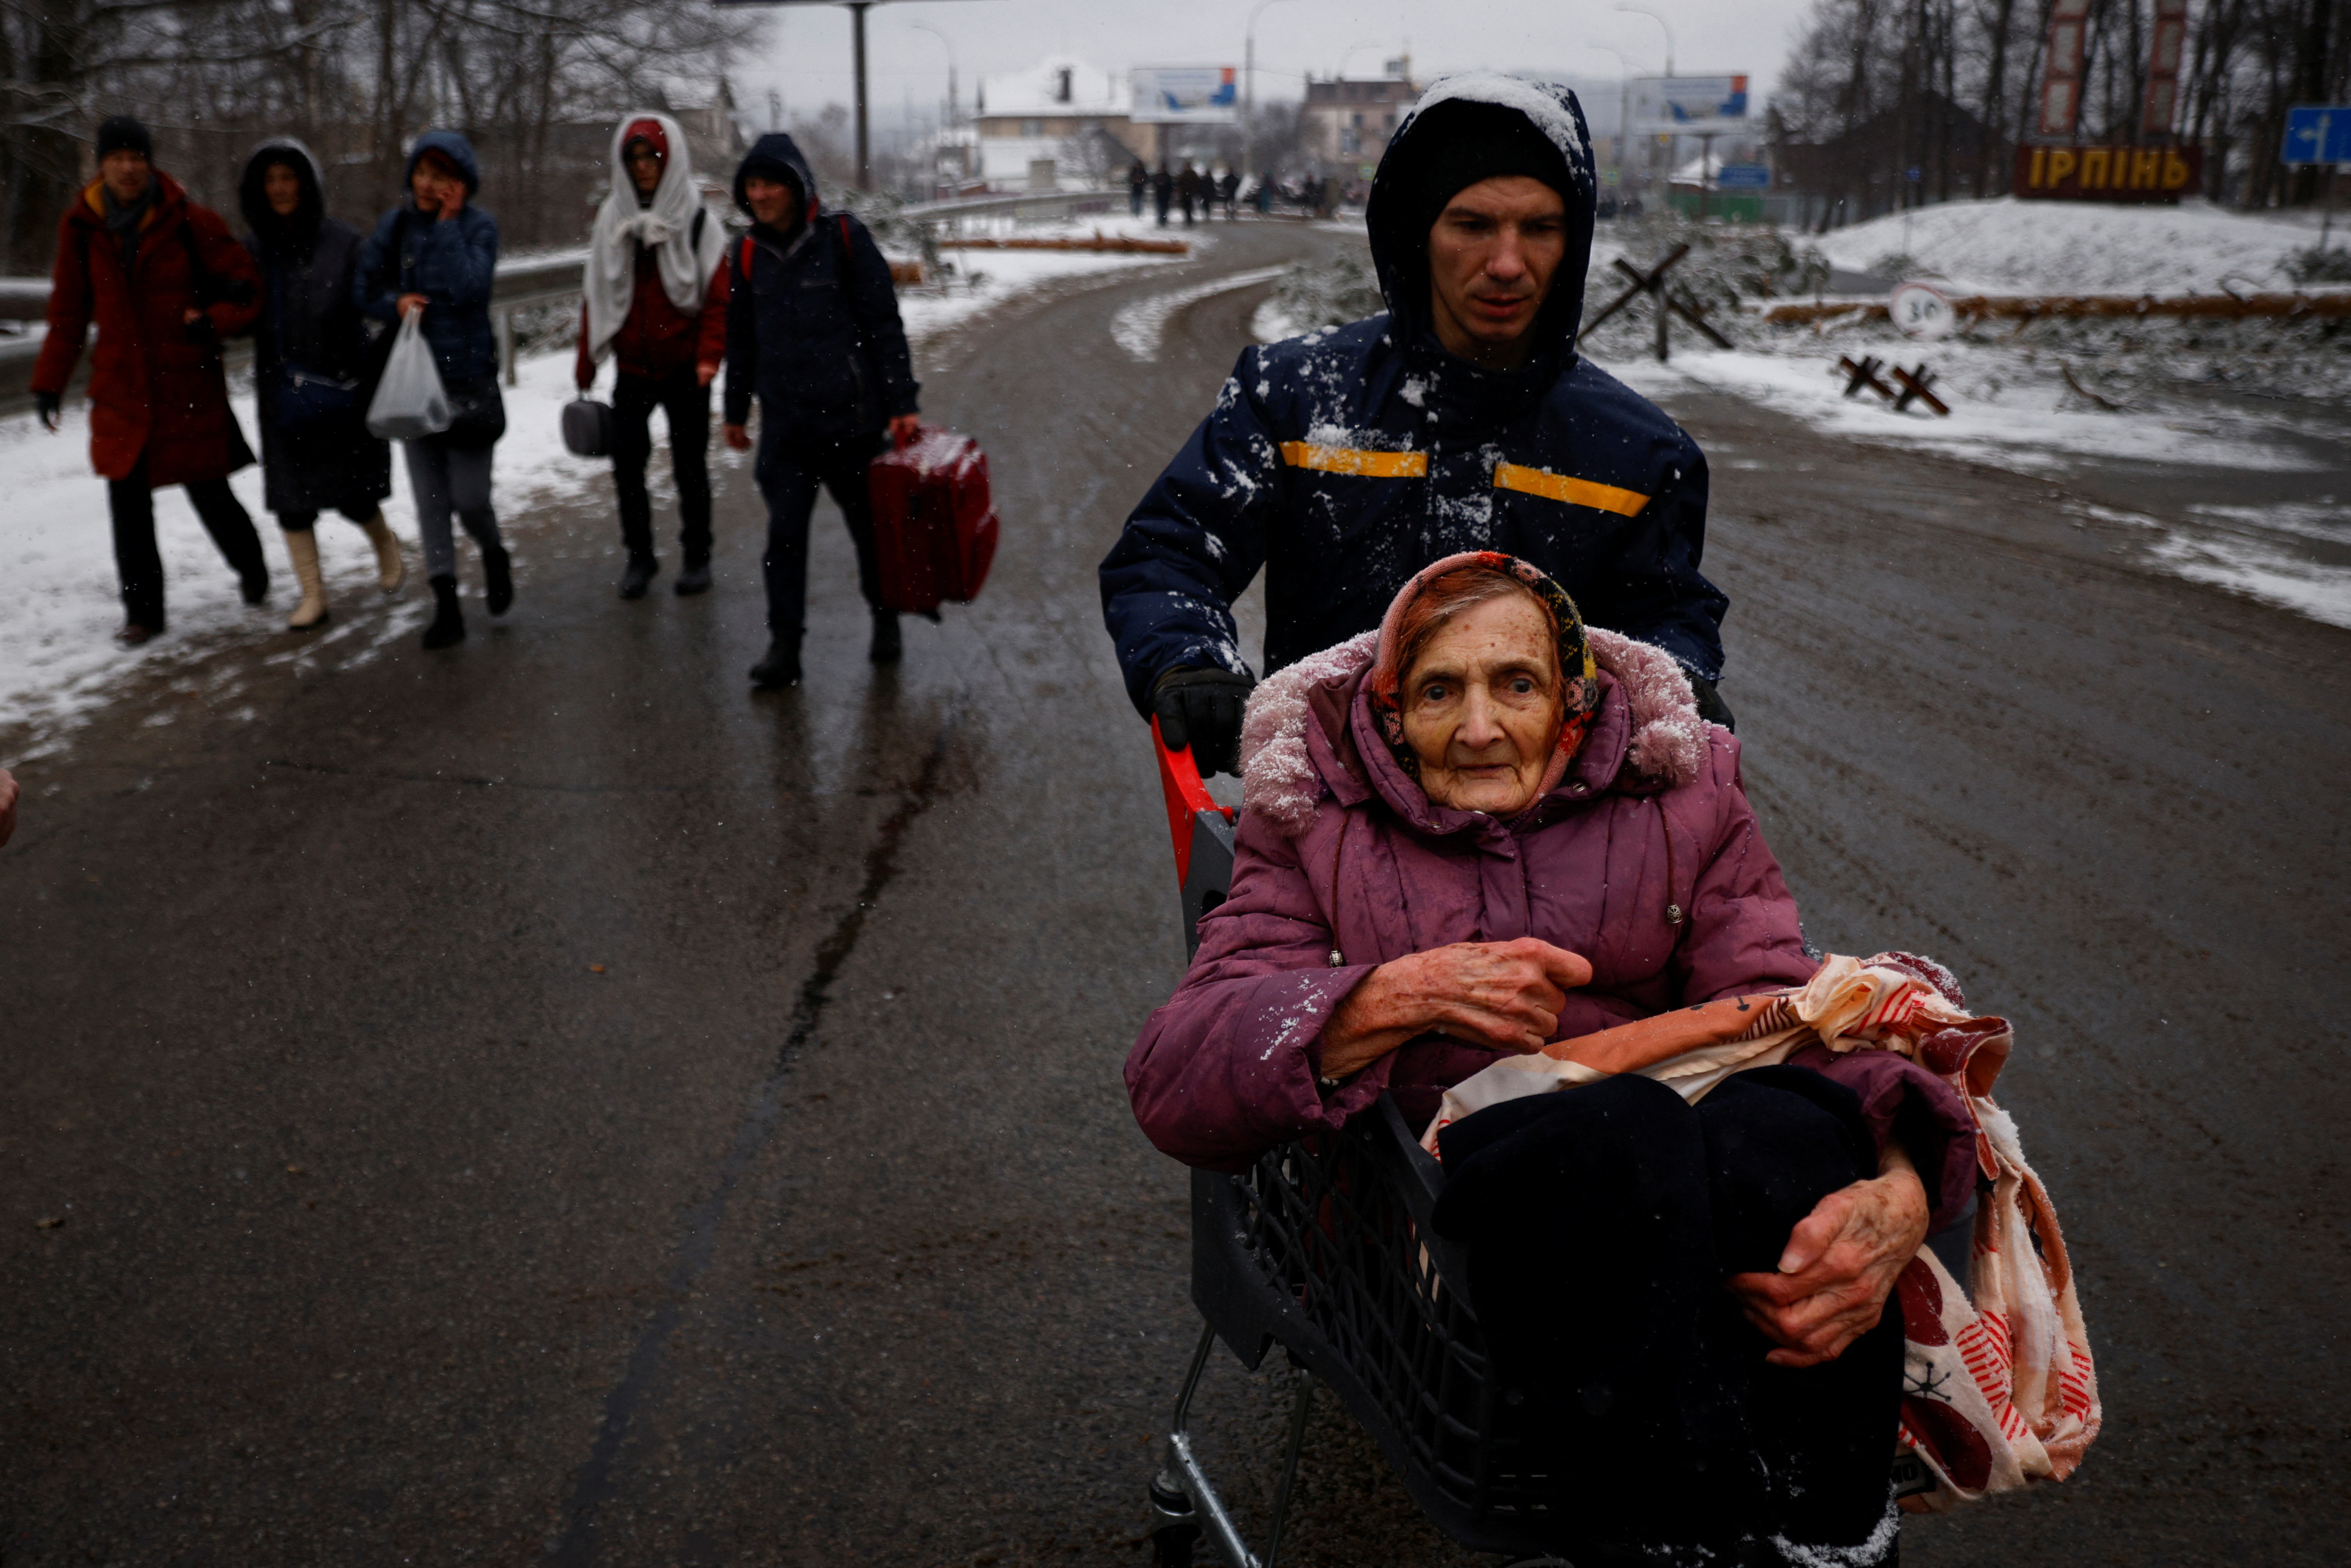 People flee from advancing Russian troops as Russia's attack on Ukraine continues in the town of Irpin outside Kyiv